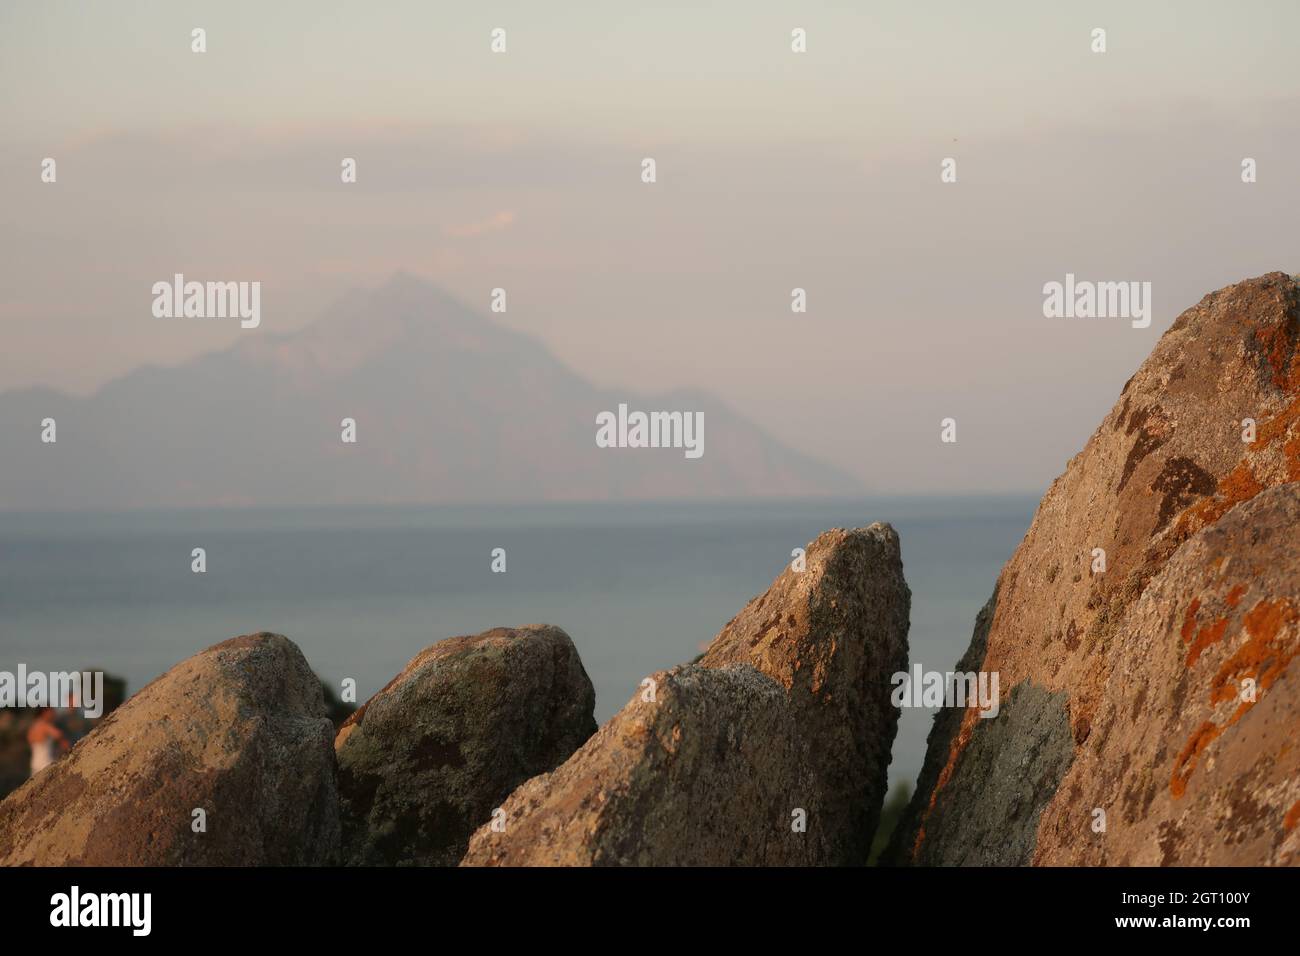 Panoramic View Of Rocks And Sea Against Sky During Sunset Stock Photo